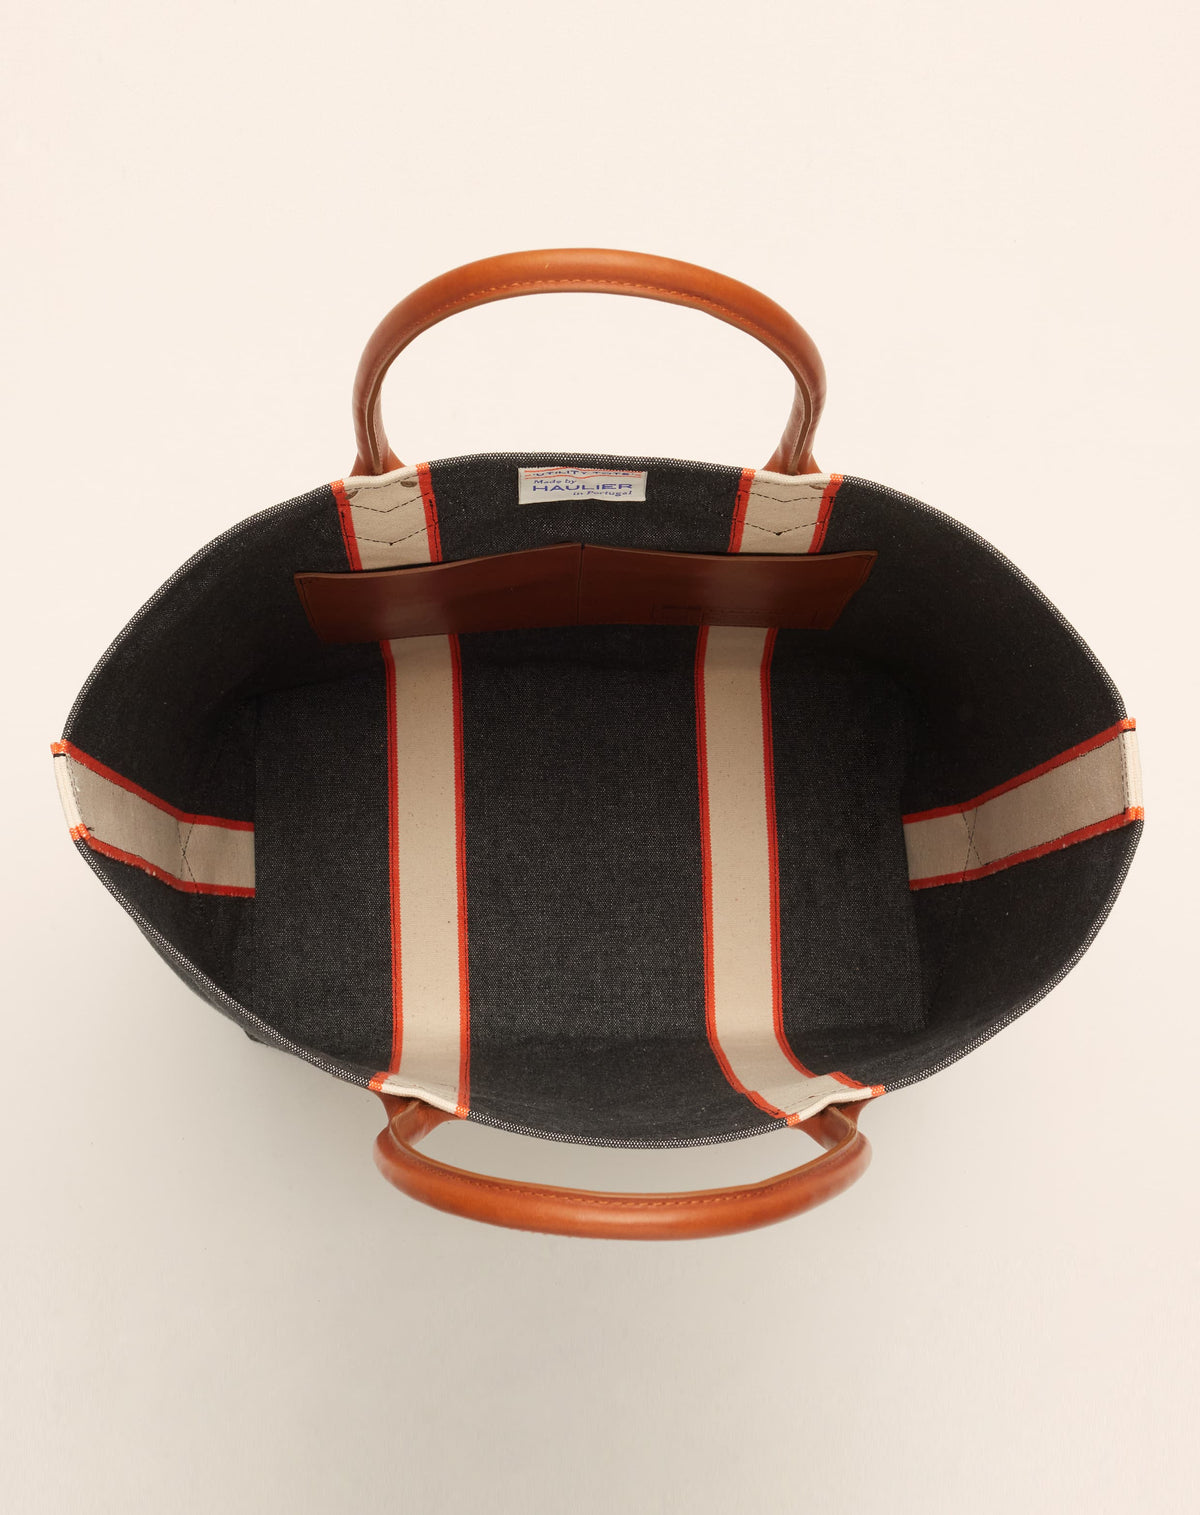 Image of inside of medium-sized classic canvas tote bag in washed black colour with tan leather handles and contrasting stripes.